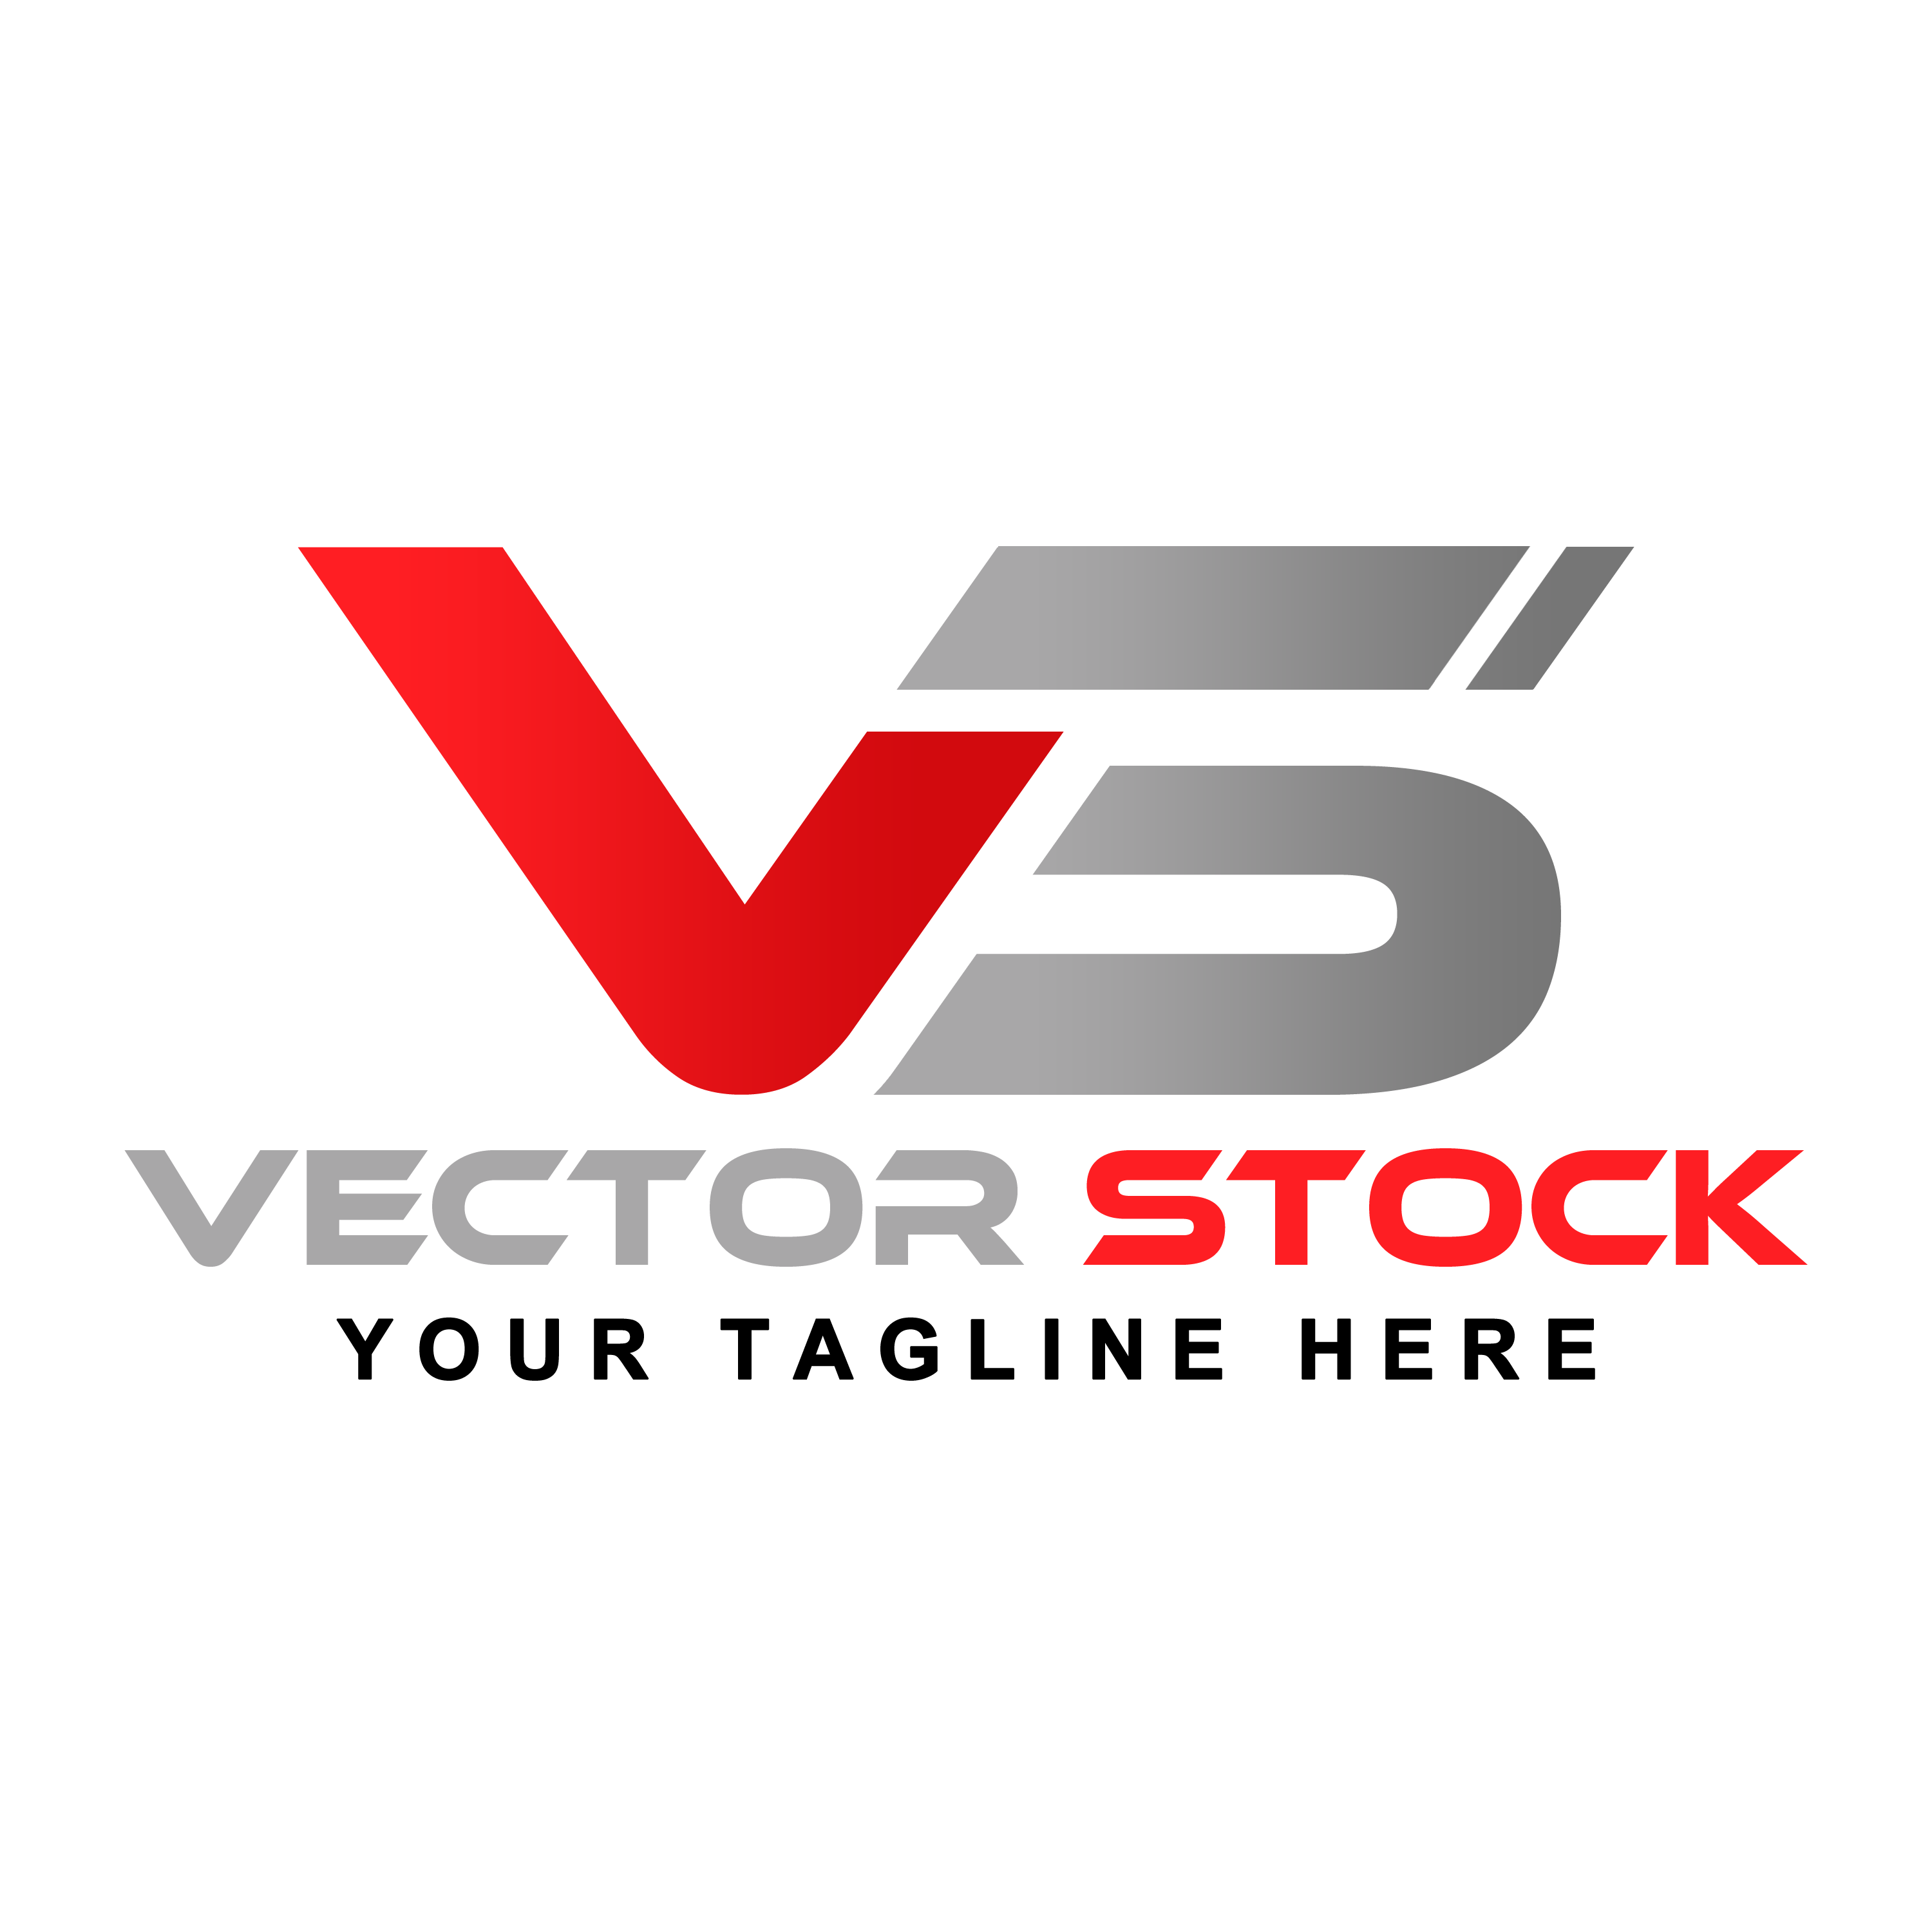 Free Vector Stock Logo Design PSD – GraphicsFamily: The #1 marketplace